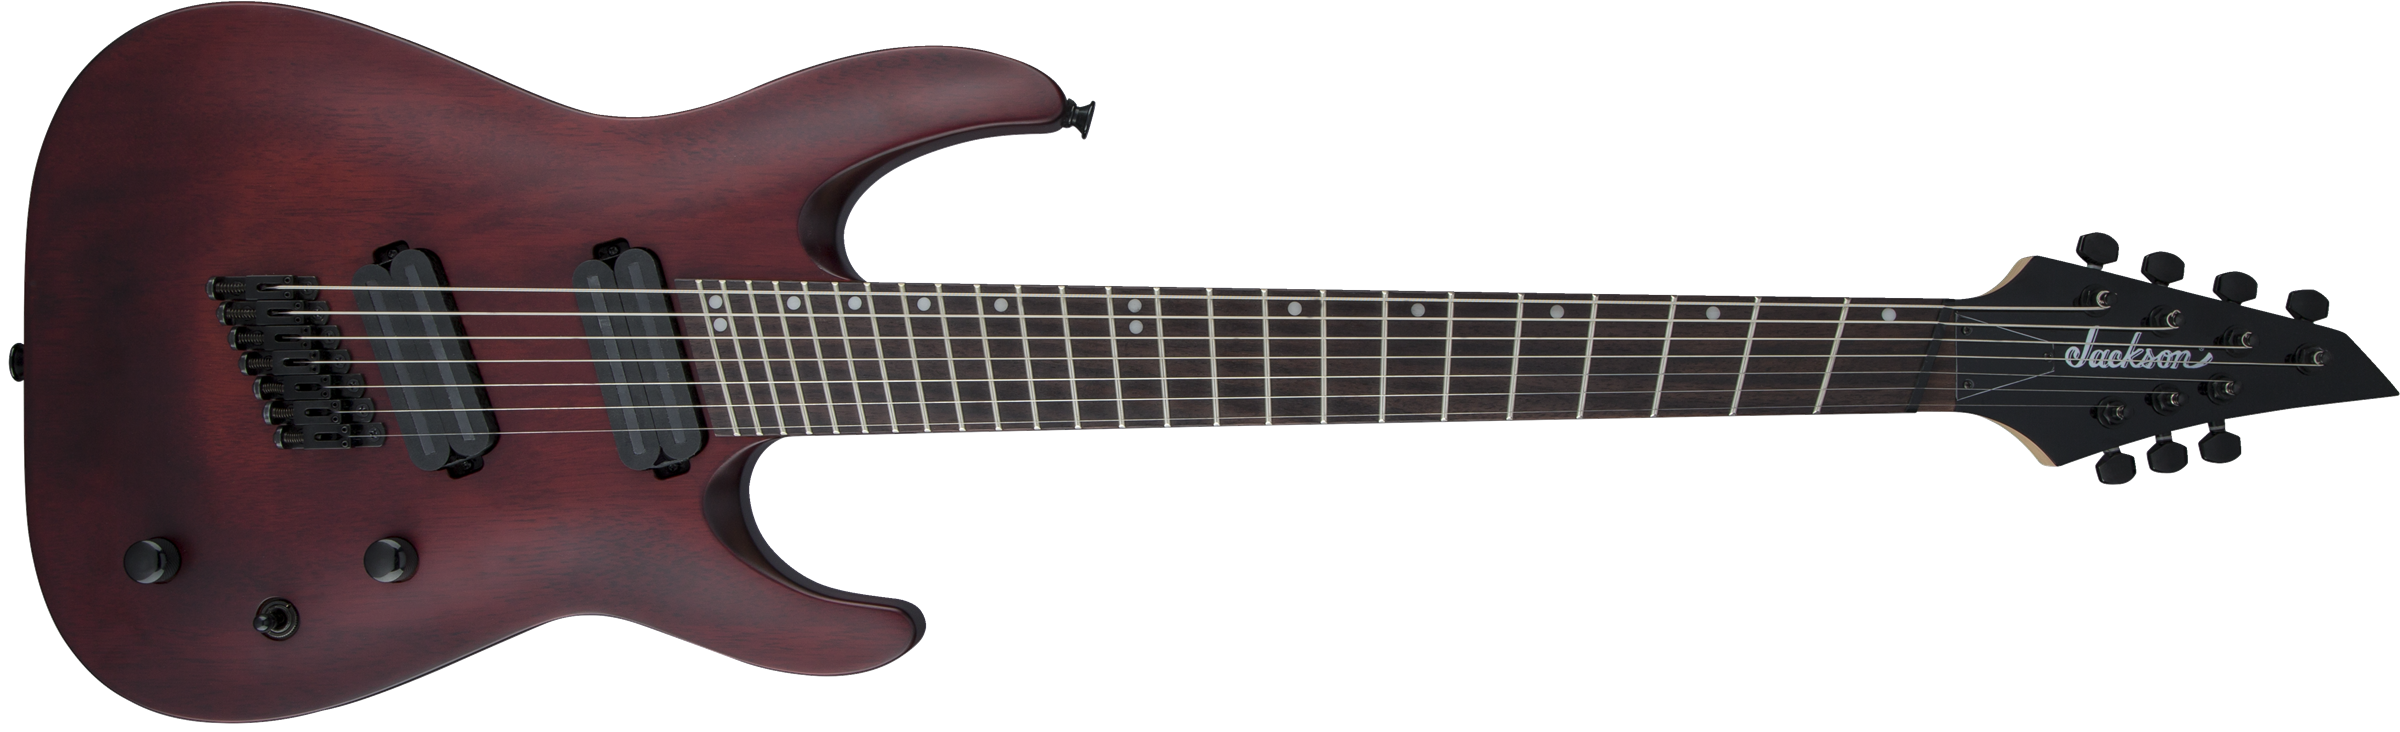 Jackson X Series Dinky Arch Top DKAF7 MS Multi-Scale Stained Mahogany